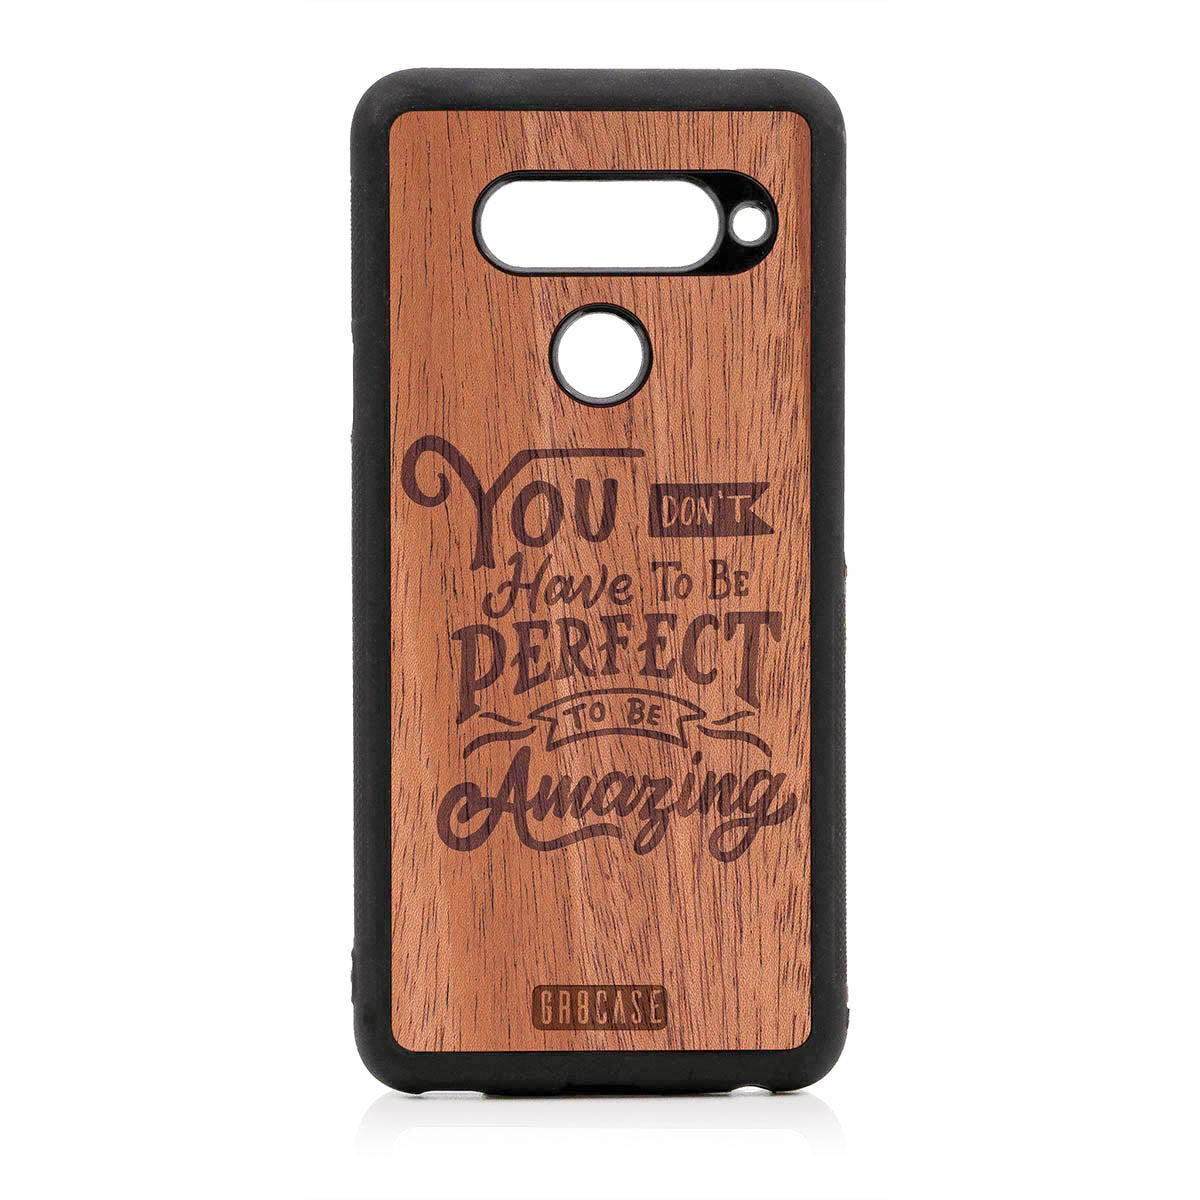 You Don't Have To Be Perfect To Be Amazing Design Wood Case For LG V40